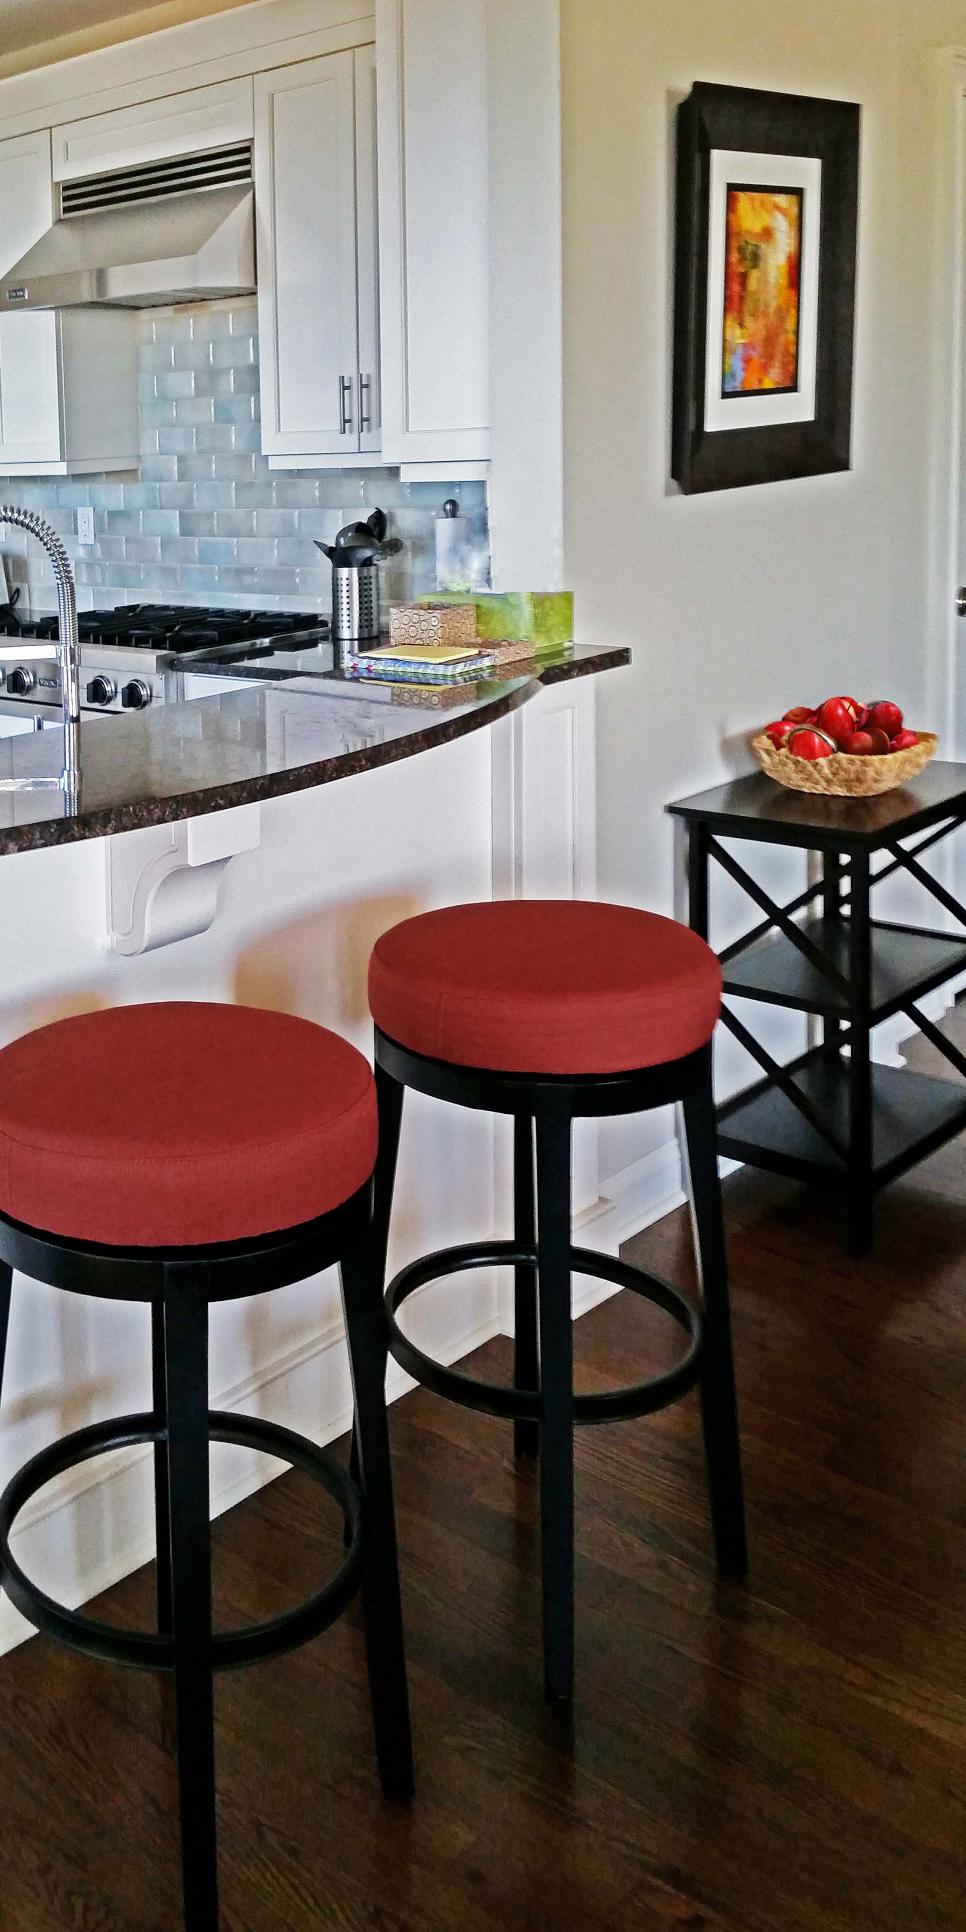 Breakfast Bar With Red and Black Stools Near Kitchen | HGTV